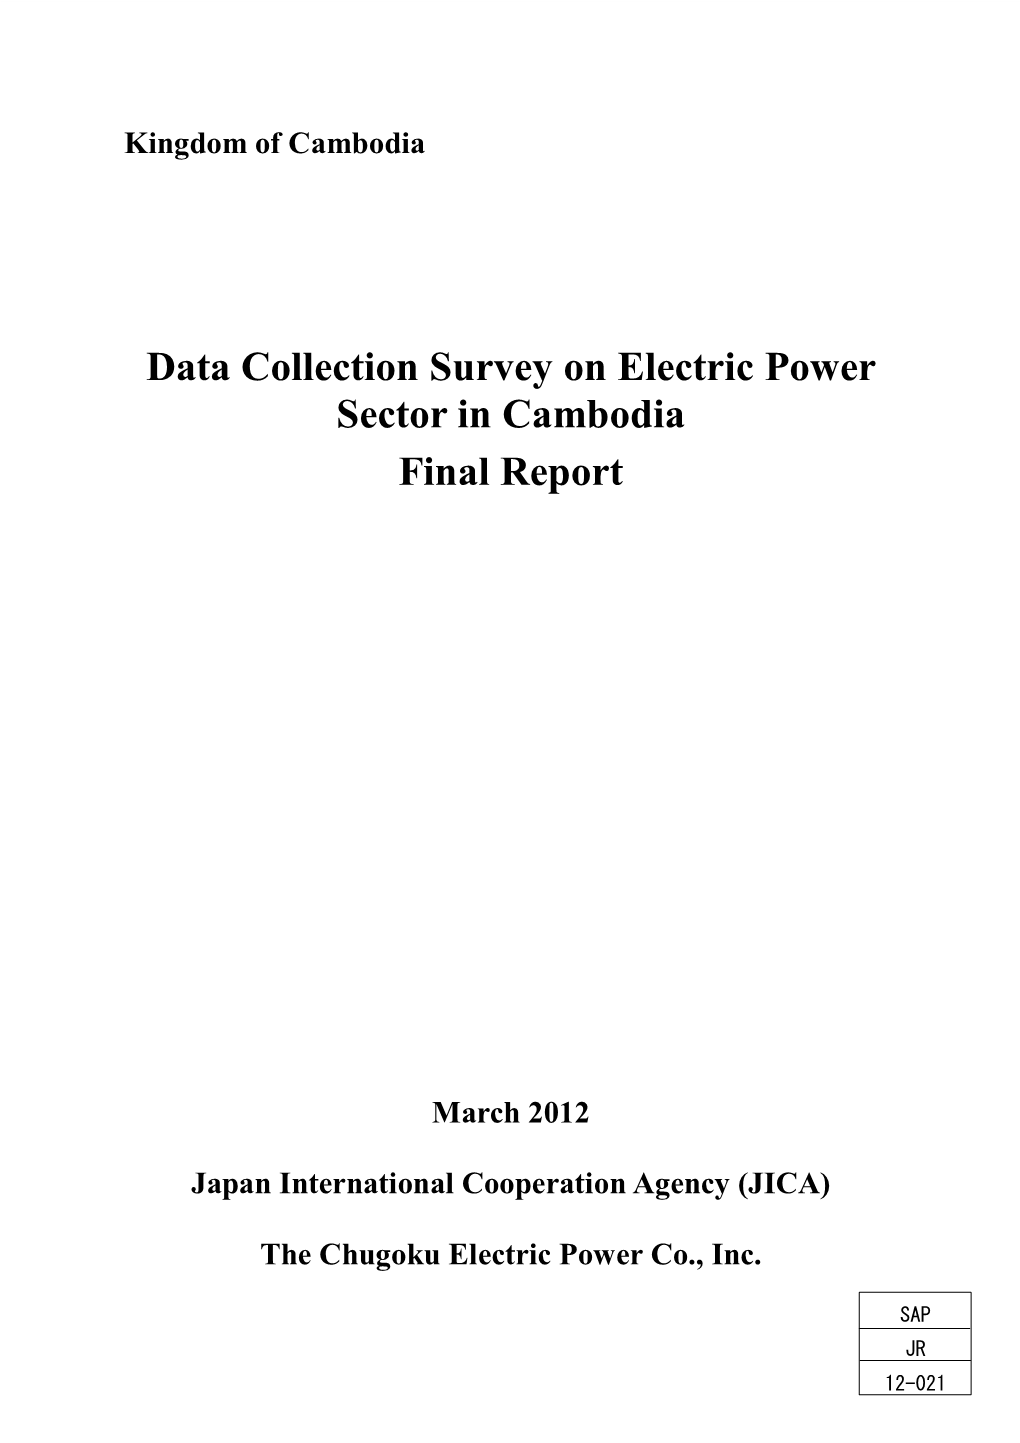 Data Collection Survey on Electric Power Sector in Cambodia Final Report